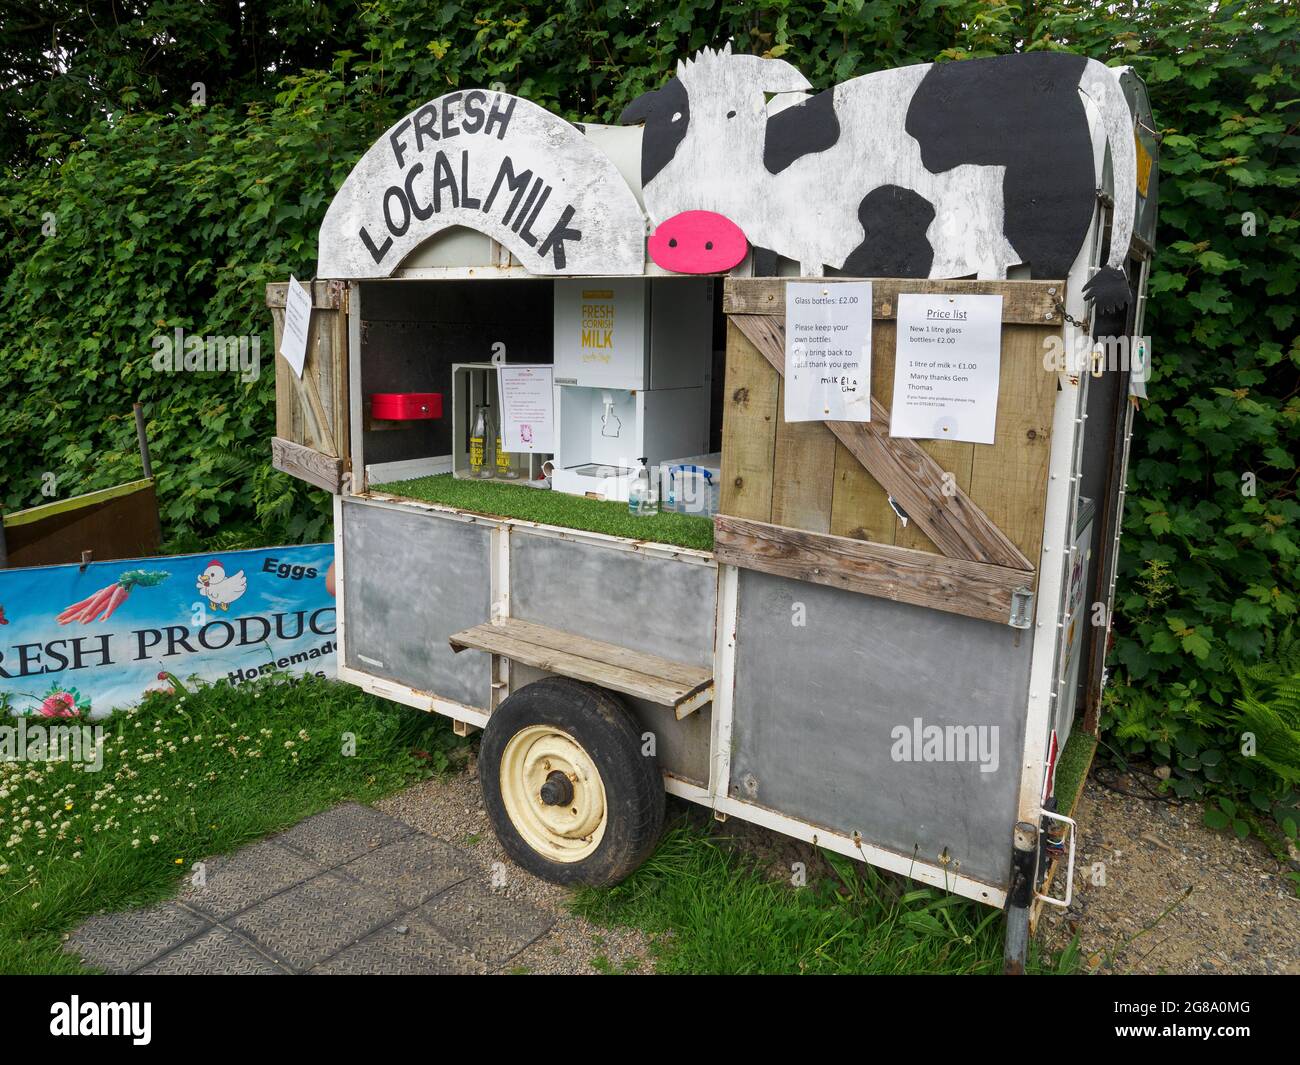 Gem's fresh produce, milk refills being sold from an old trailer at the side of the road, South Trewithey Farm, near North Hill, Cornwall, UK Stock Photo